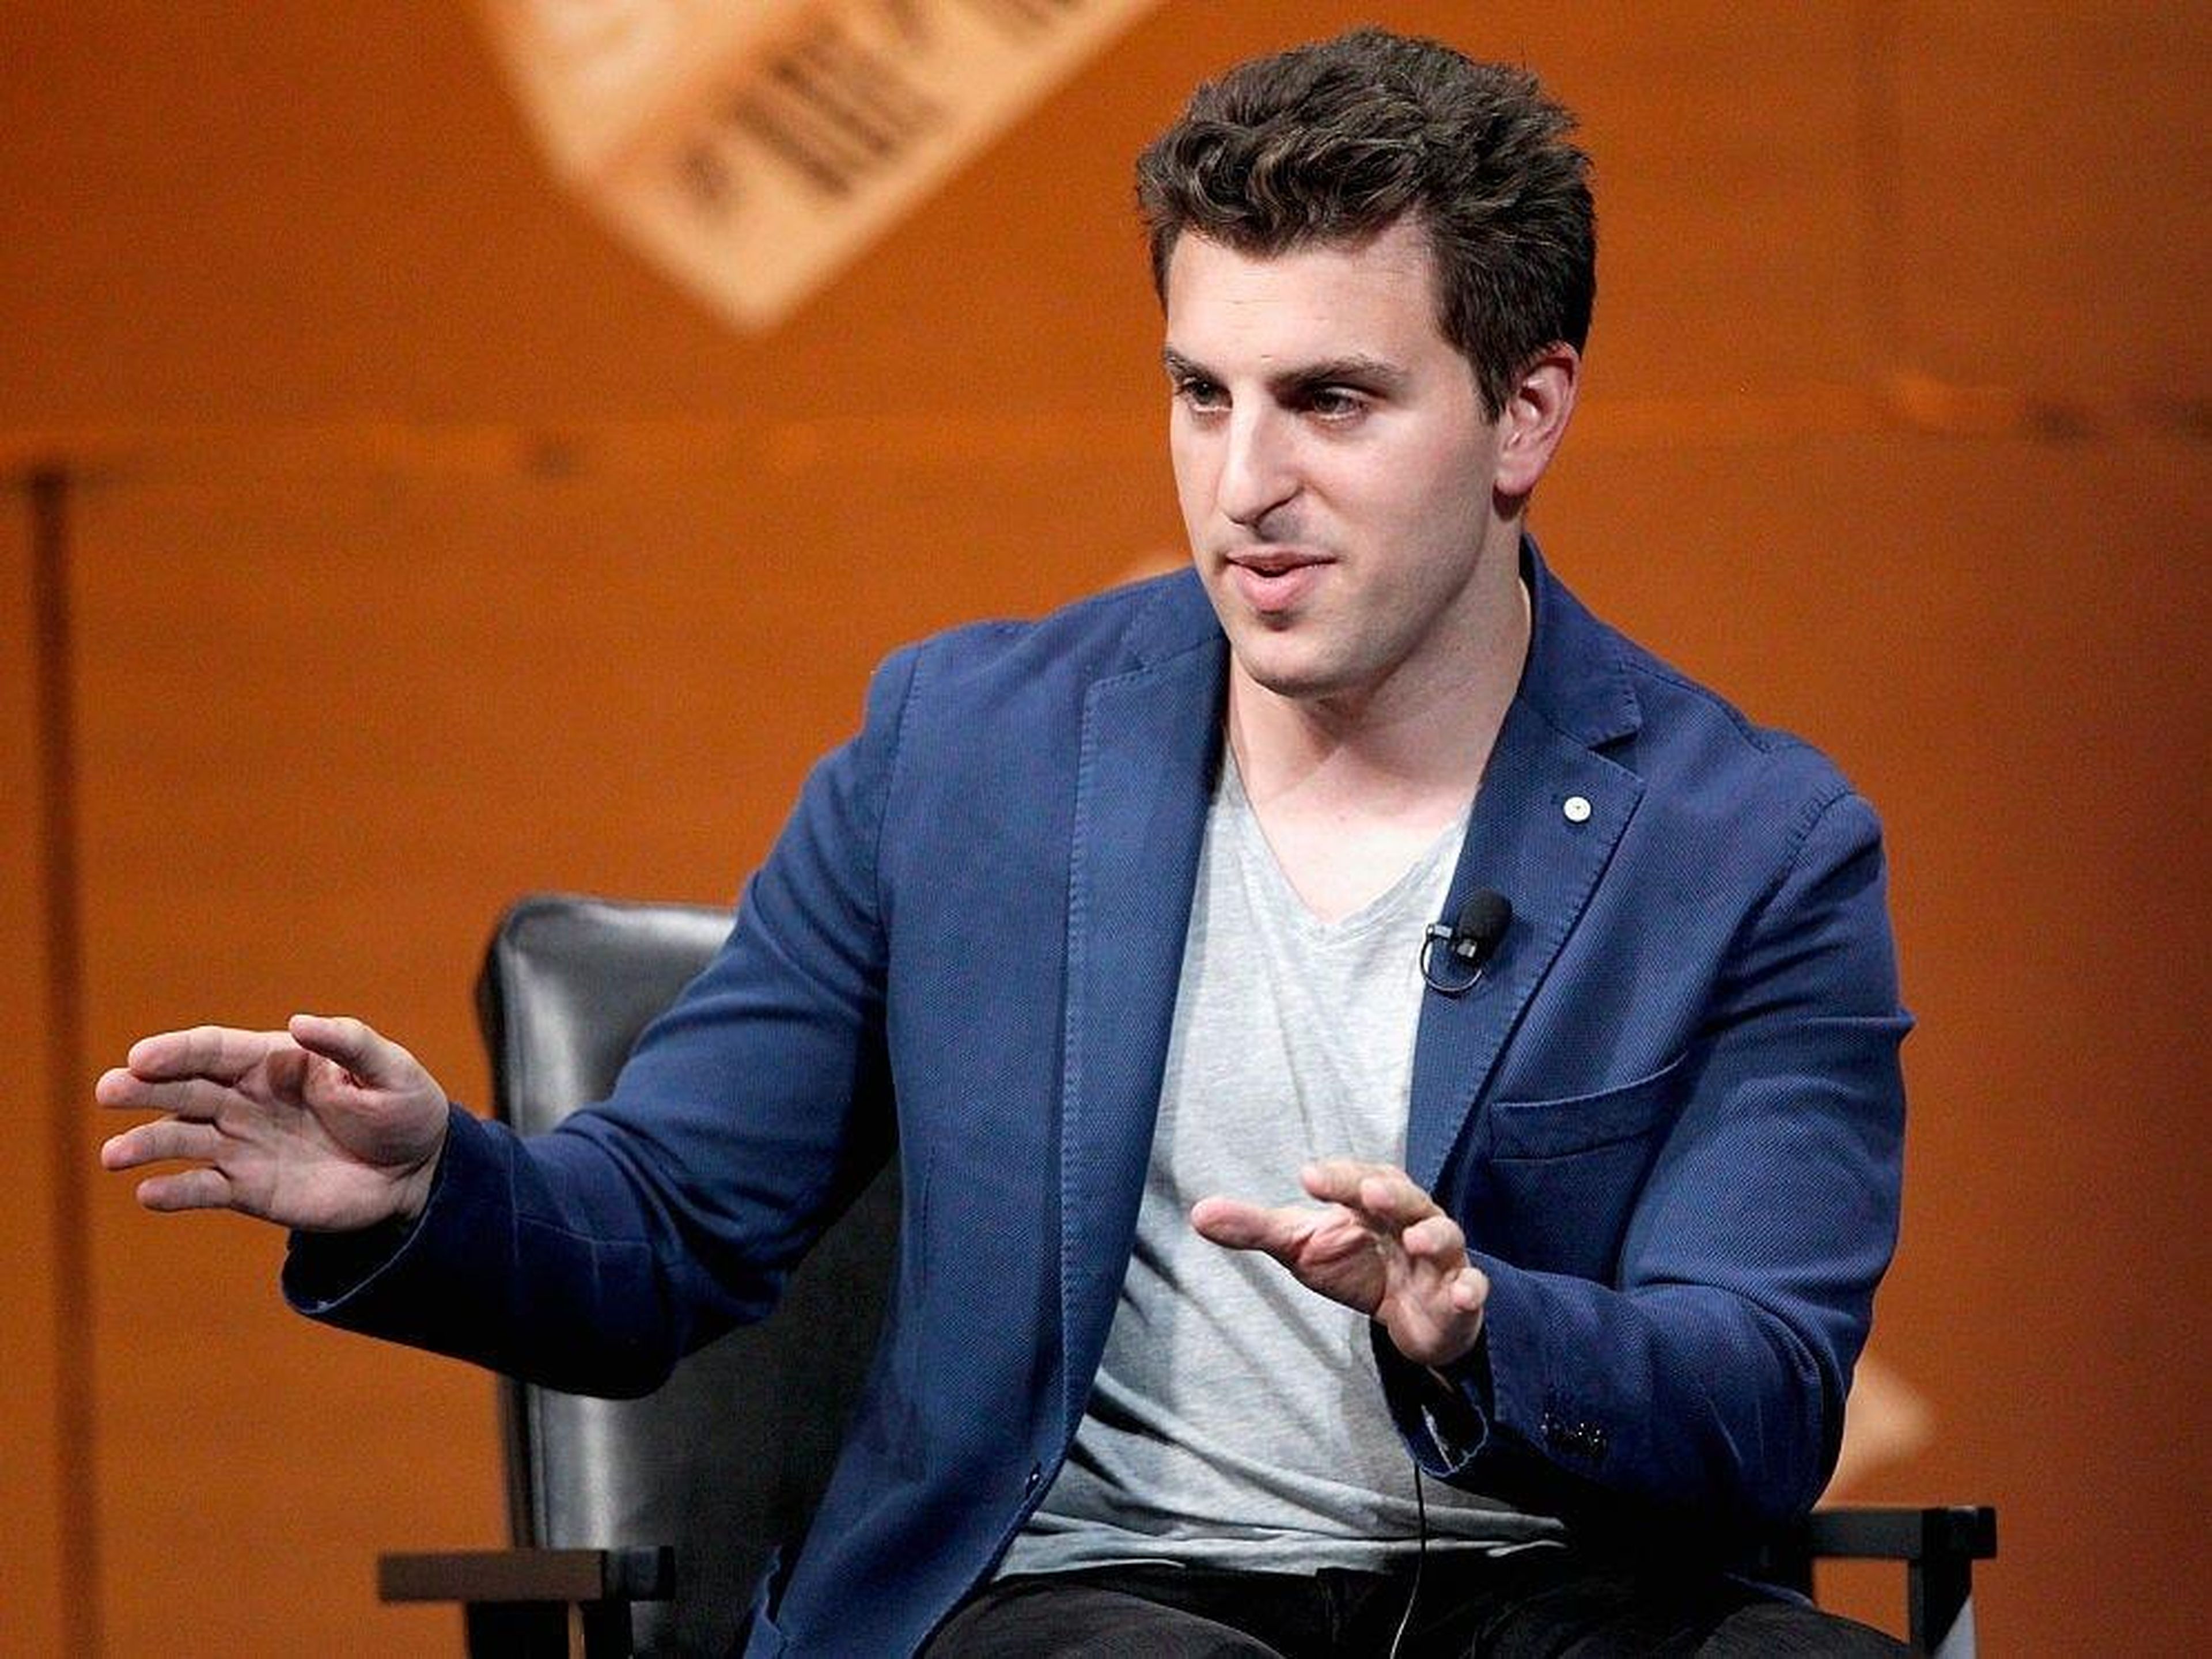 Airbnb has reportedly told employees it's resuming plans to go public as business slowly bounces back